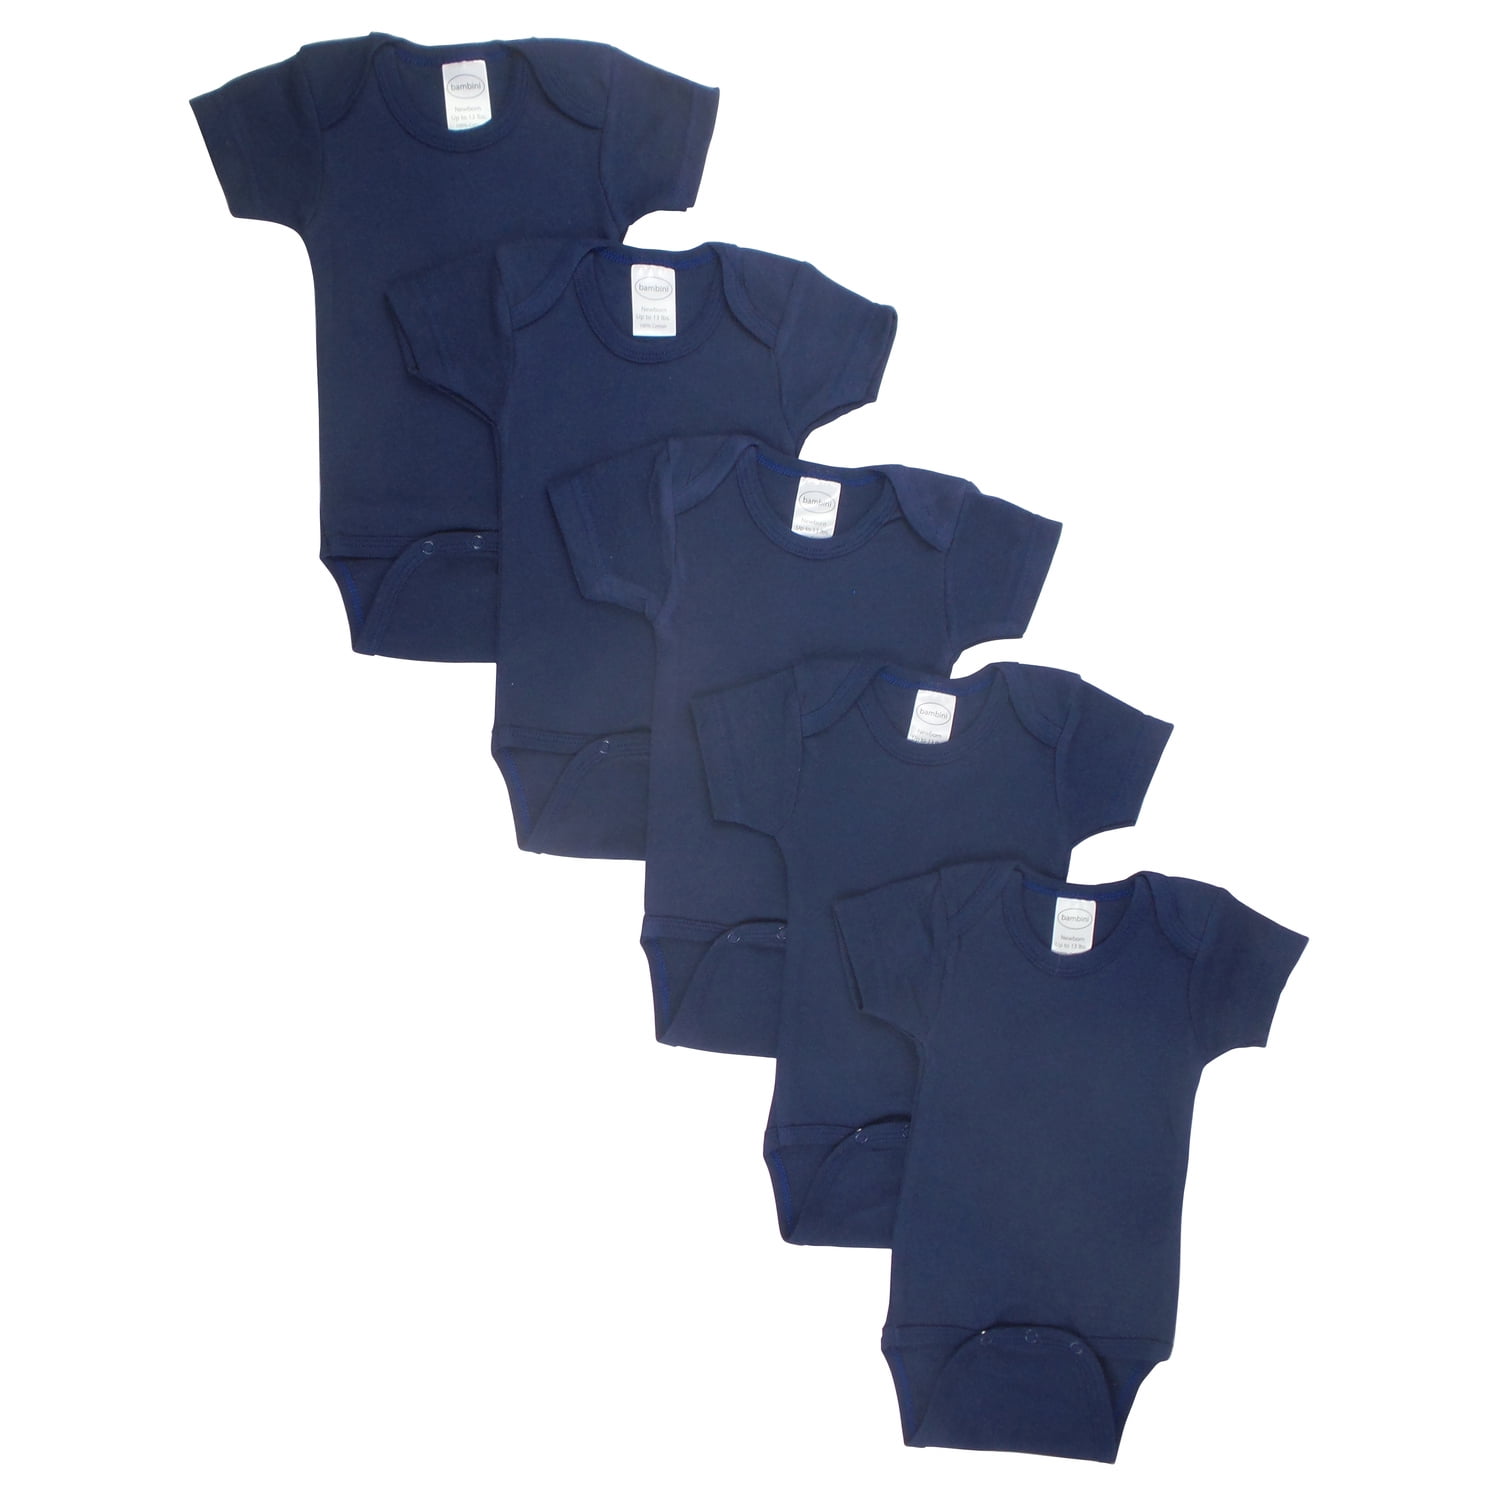 Ls-0193 Bodysuit, Navy - Small - Pack Of 5